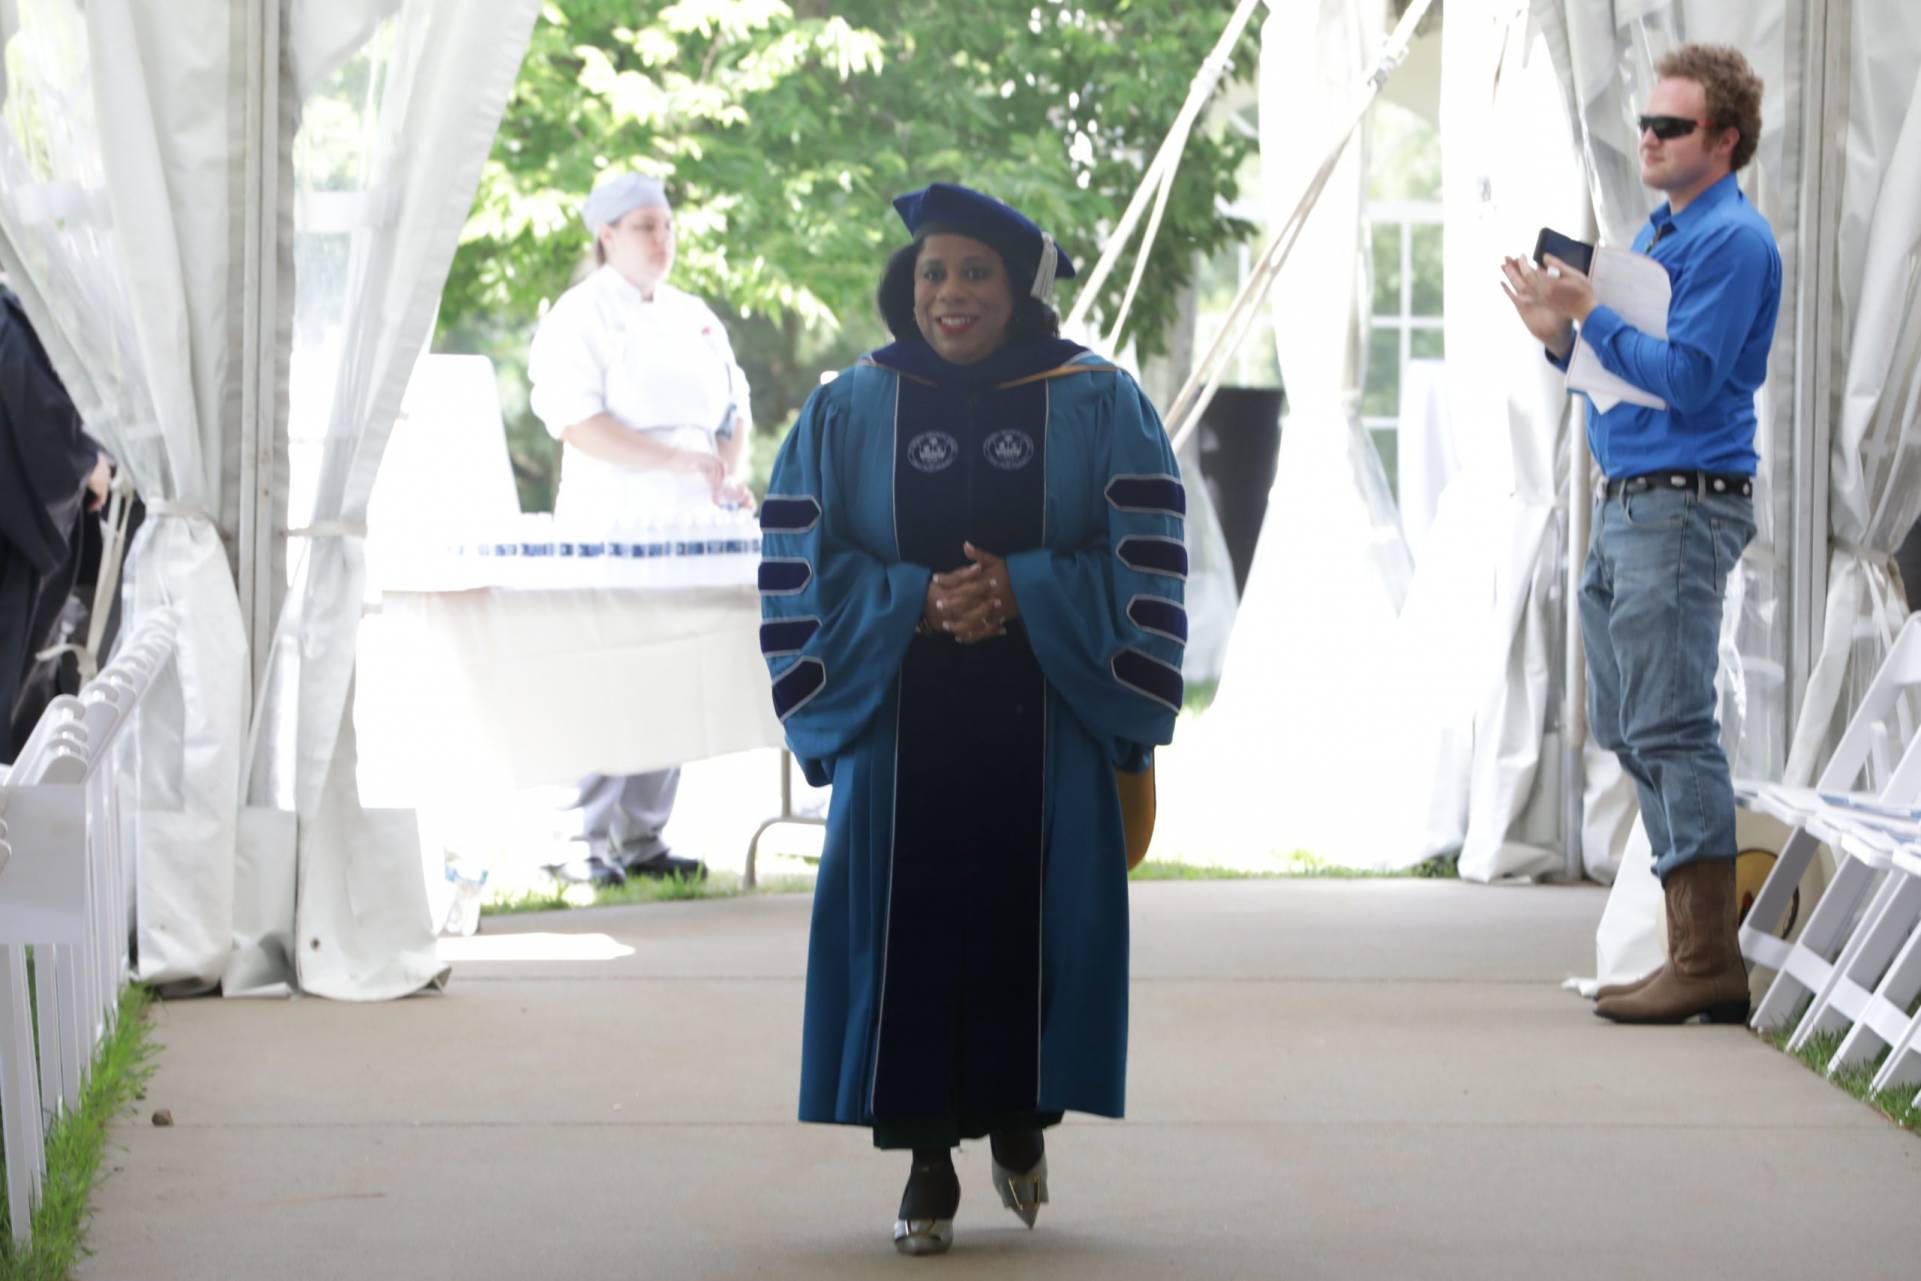 Dr. Harvey-Smith walking alone following the procession for the Installation Ceremony.